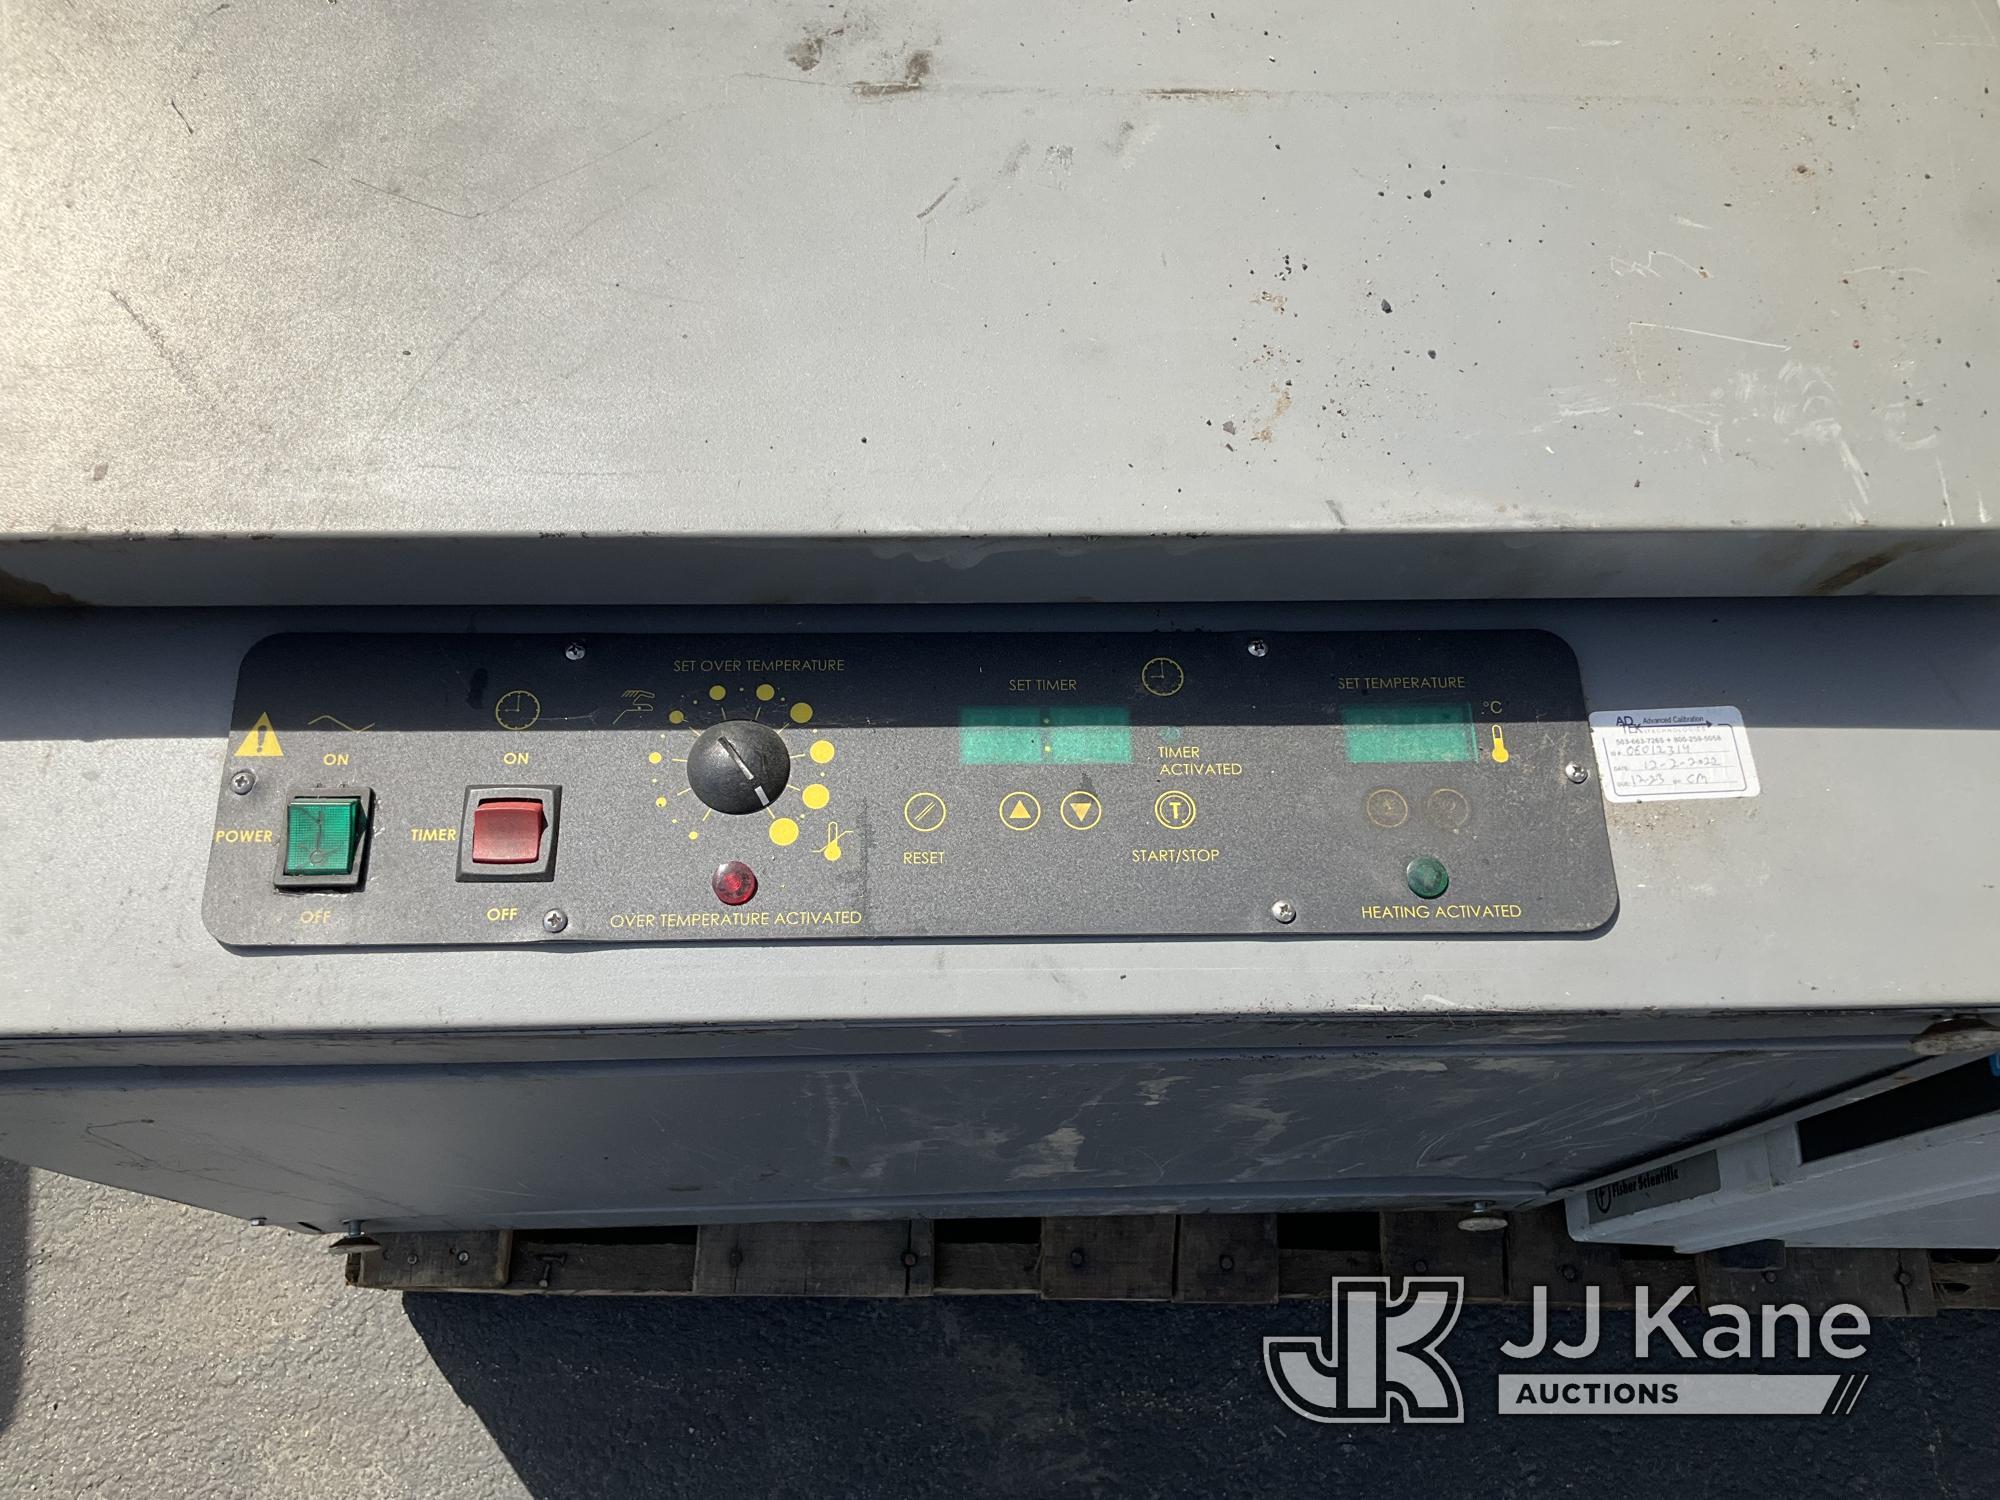 (Jurupa Valley, CA) 2 Heating Ovens (Used) NOTE: This unit is being sold AS IS/WHERE IS via Timed Au